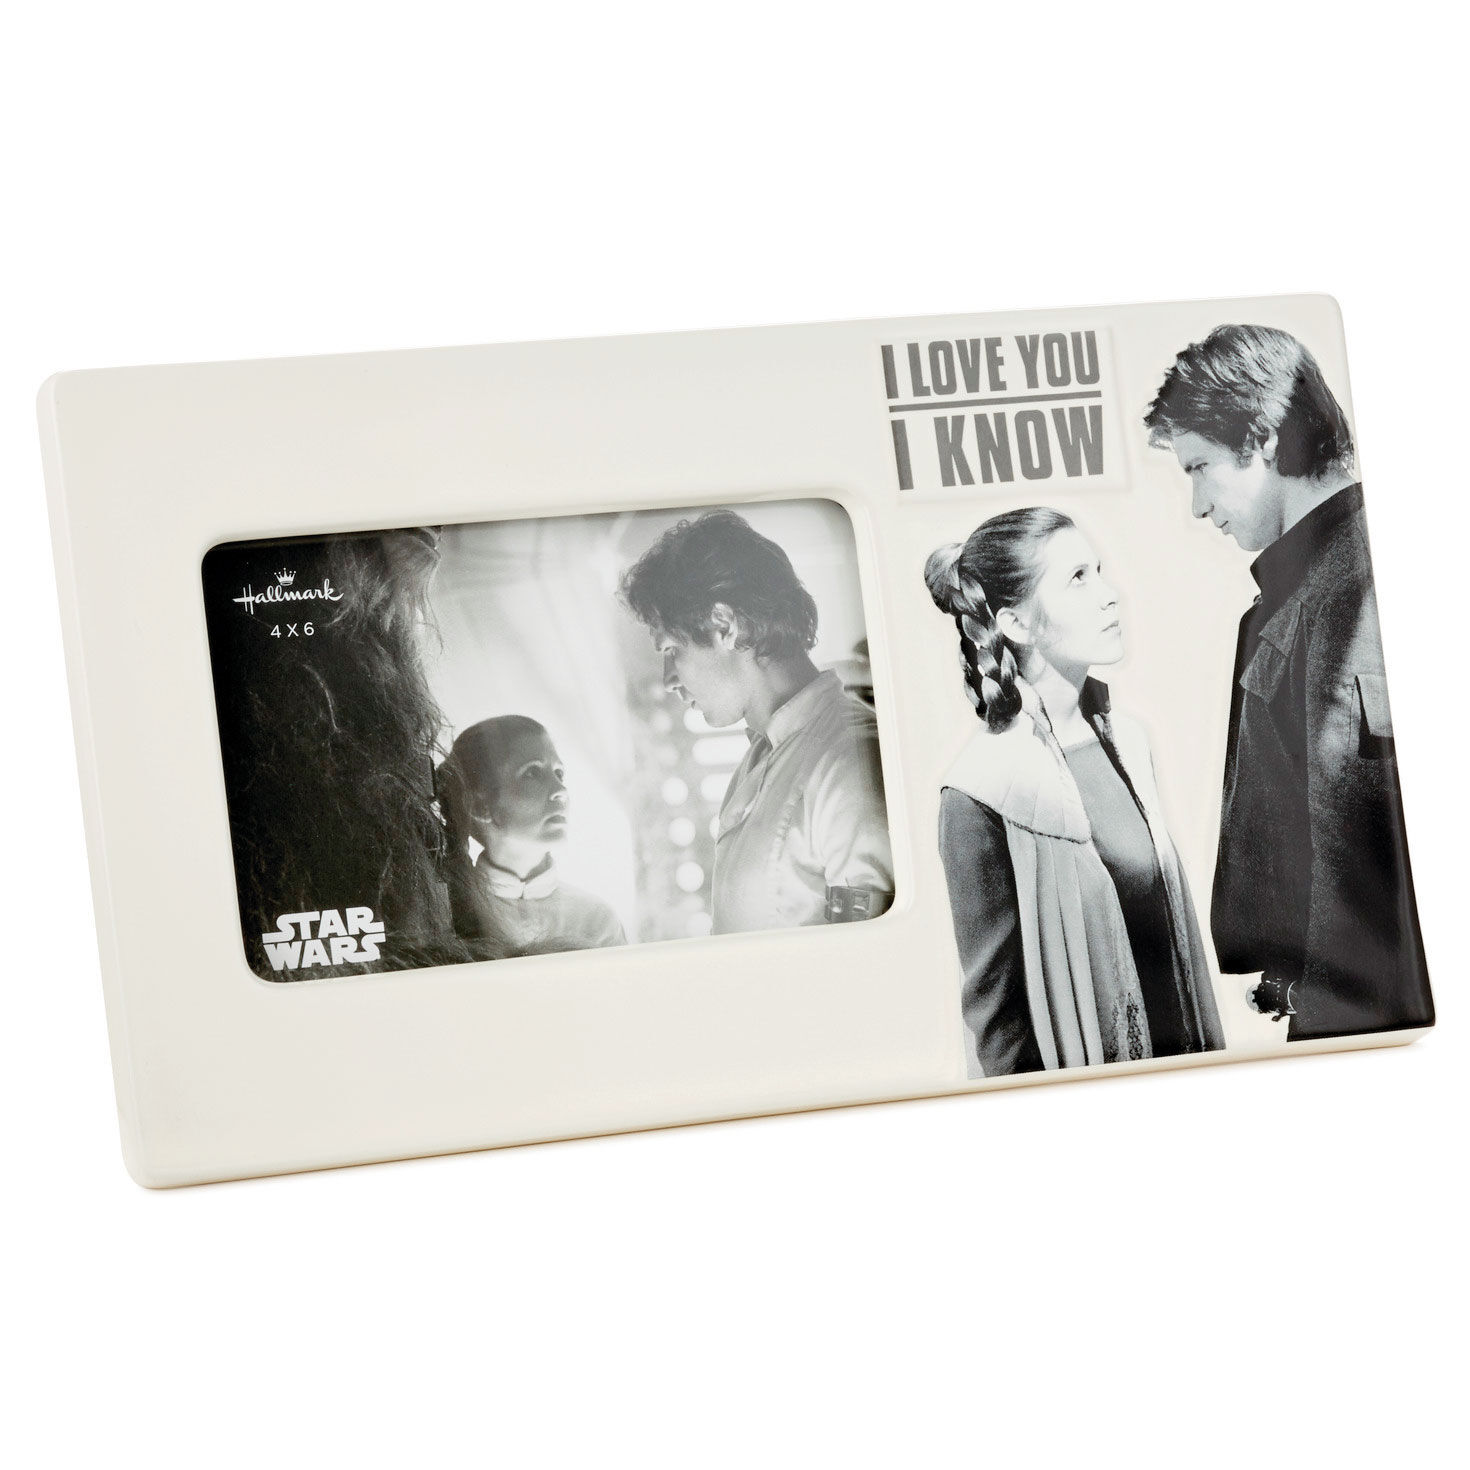 https://www.hallmark.com/dw/image/v2/AALB_PRD/on/demandware.static/-/Sites-hallmark-master/default/dw404ebe0c/images/finished-goods/products/1SHP2150/Han-Solo-Princess-Leia-Love-You-I-Know-Photo-Frame_1SHP2150_01.jpg?sfrm=jpg